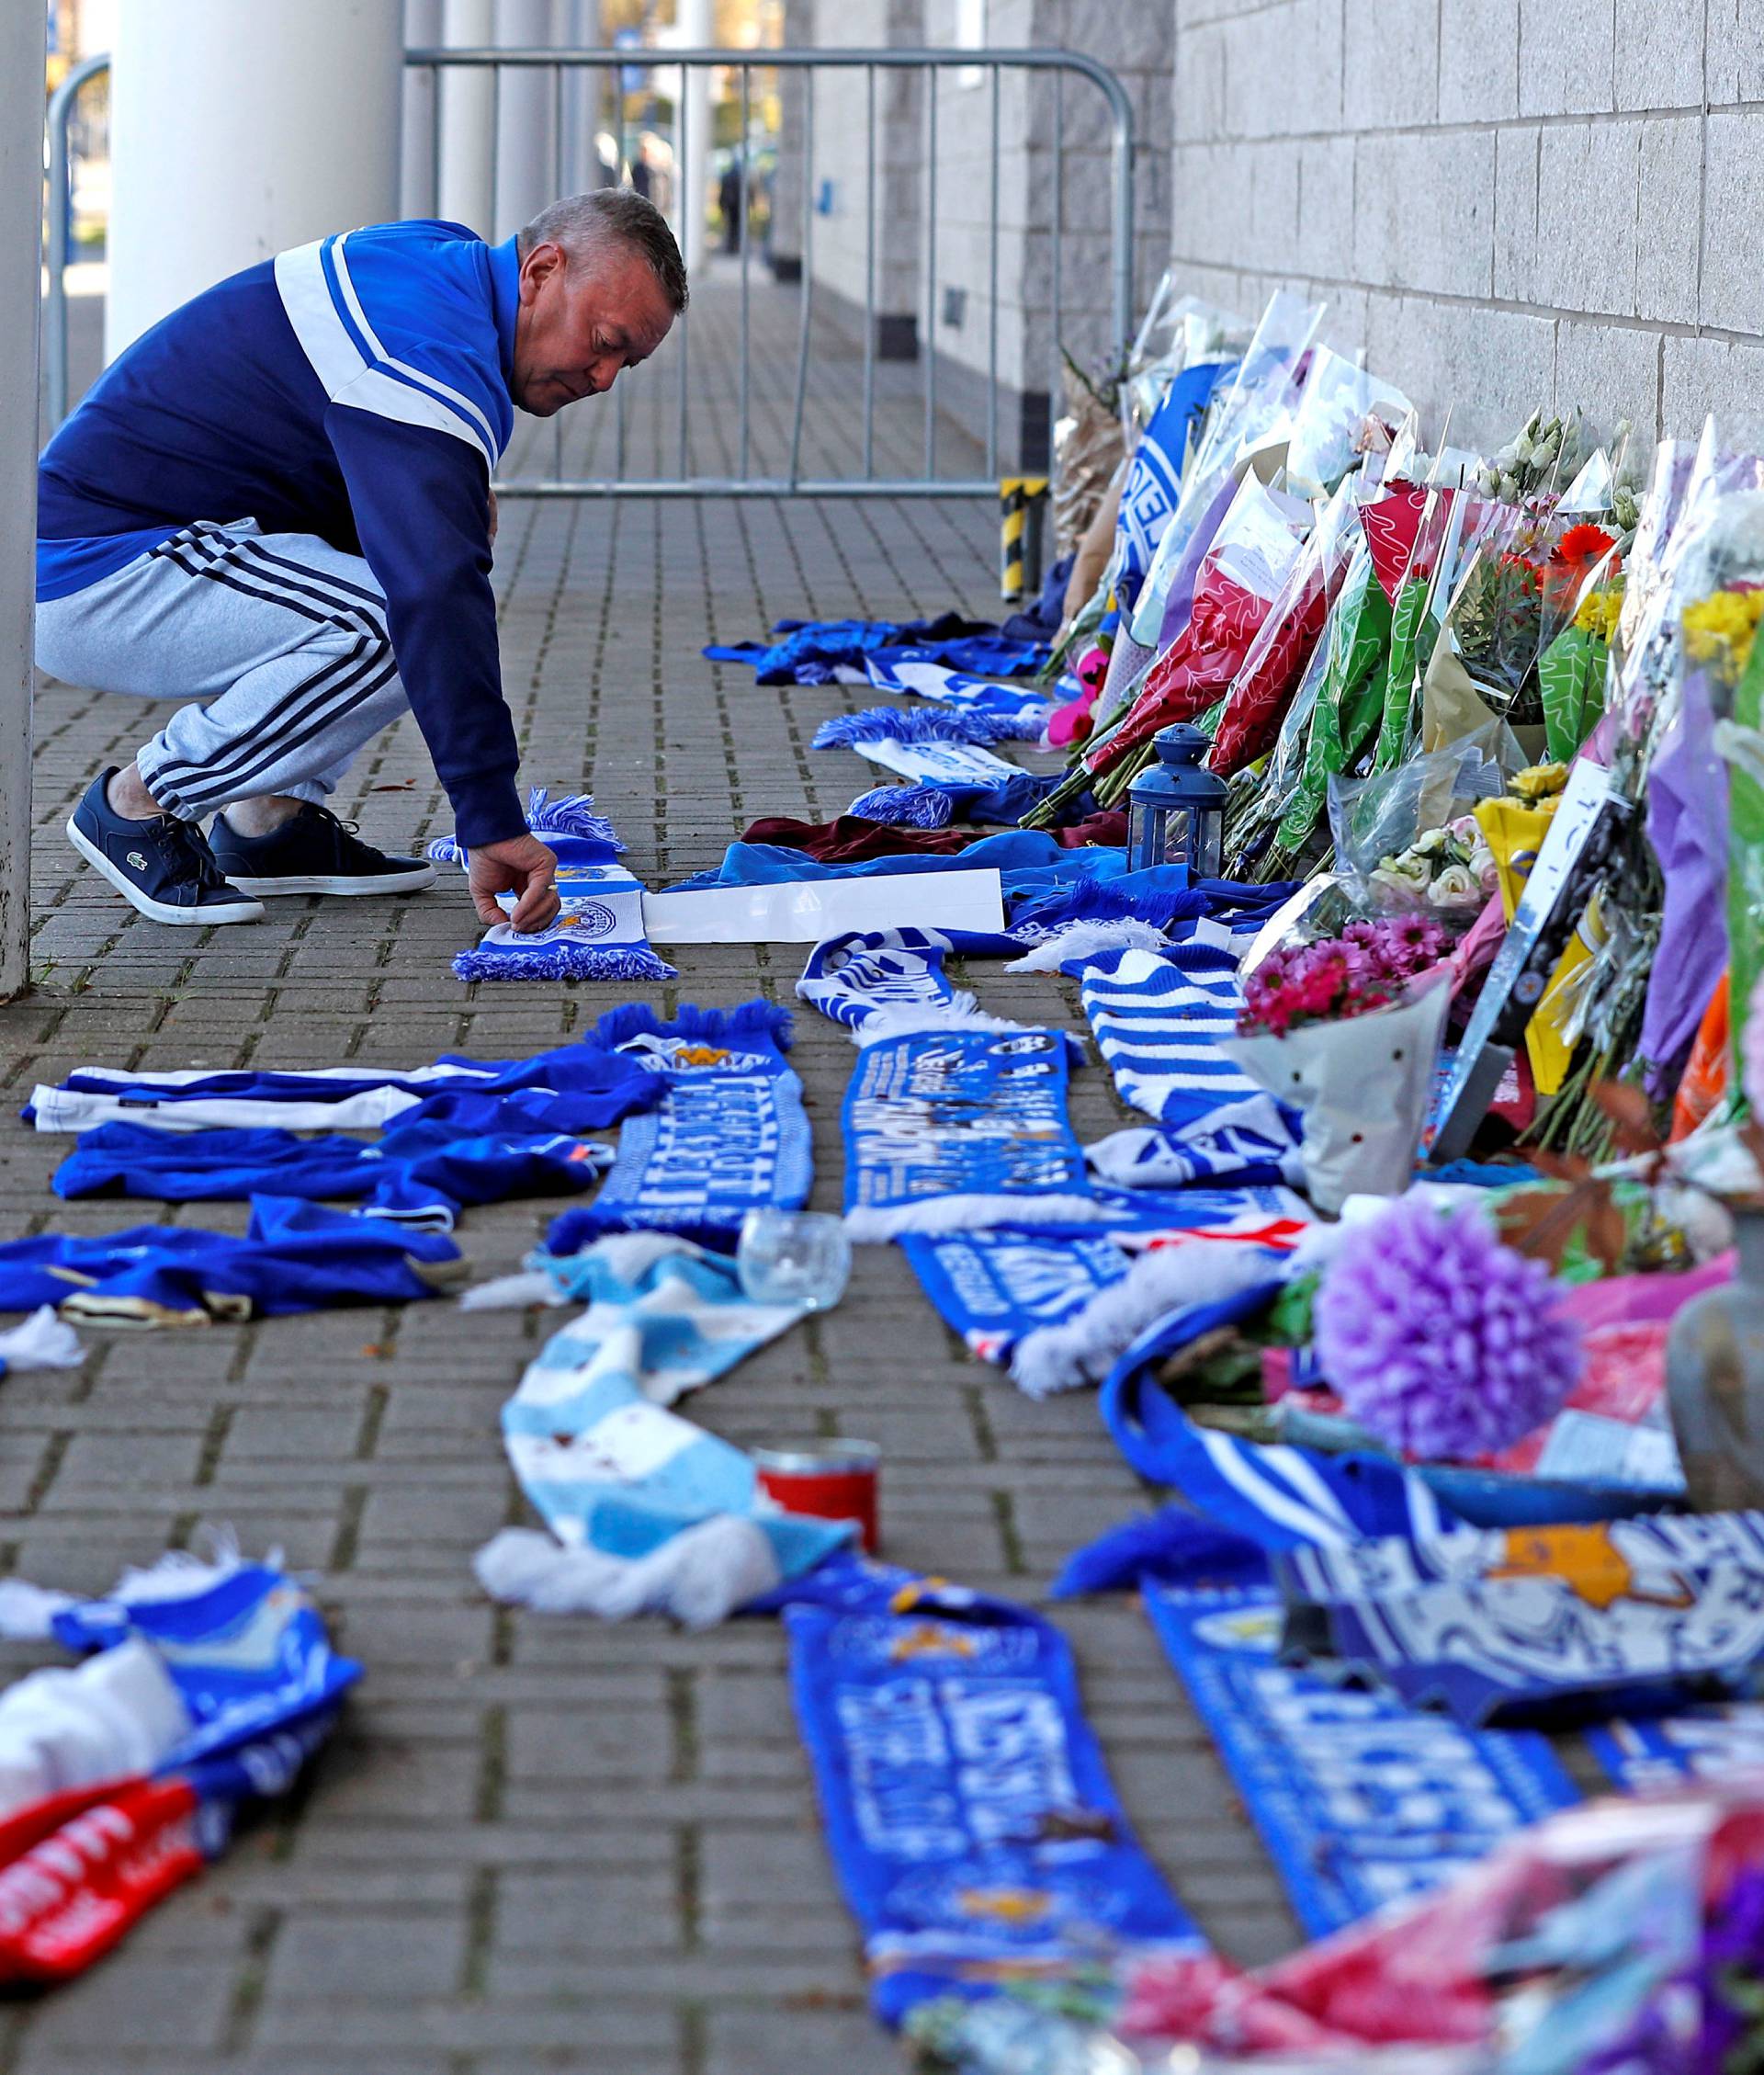 A Leicester City football fan places a scarf outside the football stadium, after the helicopter of the club owner Thai businessman Vichai Srivaddhanaprabha crashed when leaving the ground on Saturday evening after the match, in Leicester